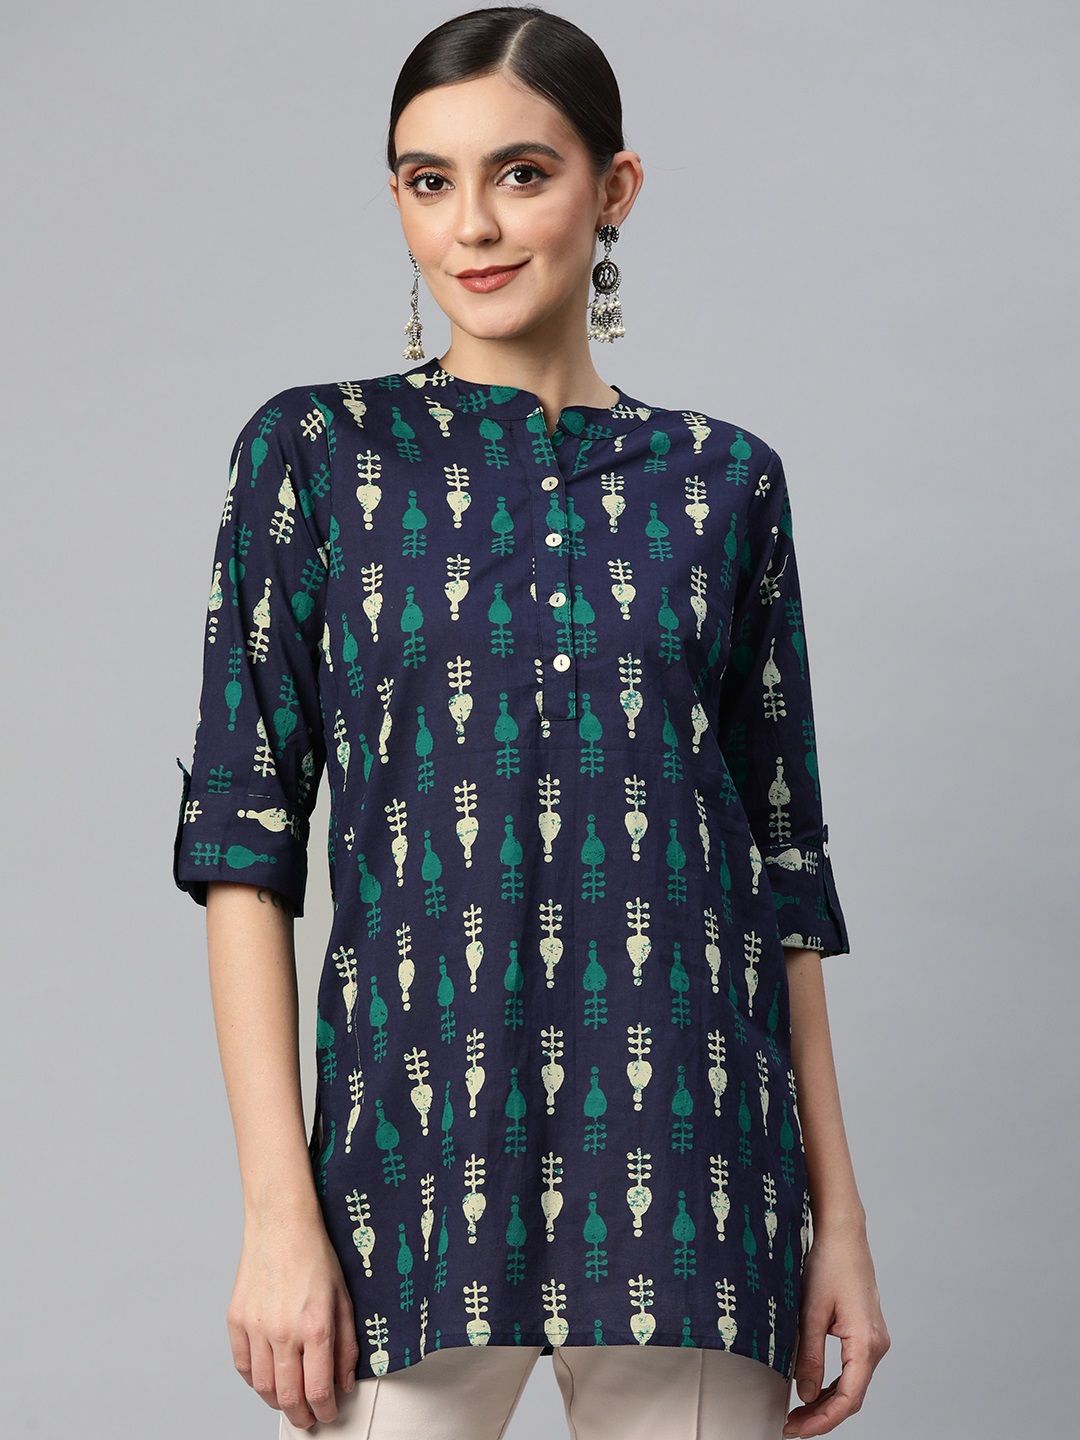 SVARCHI Navy Blue & Off White Pure Cotton Printed Tunic Price in India